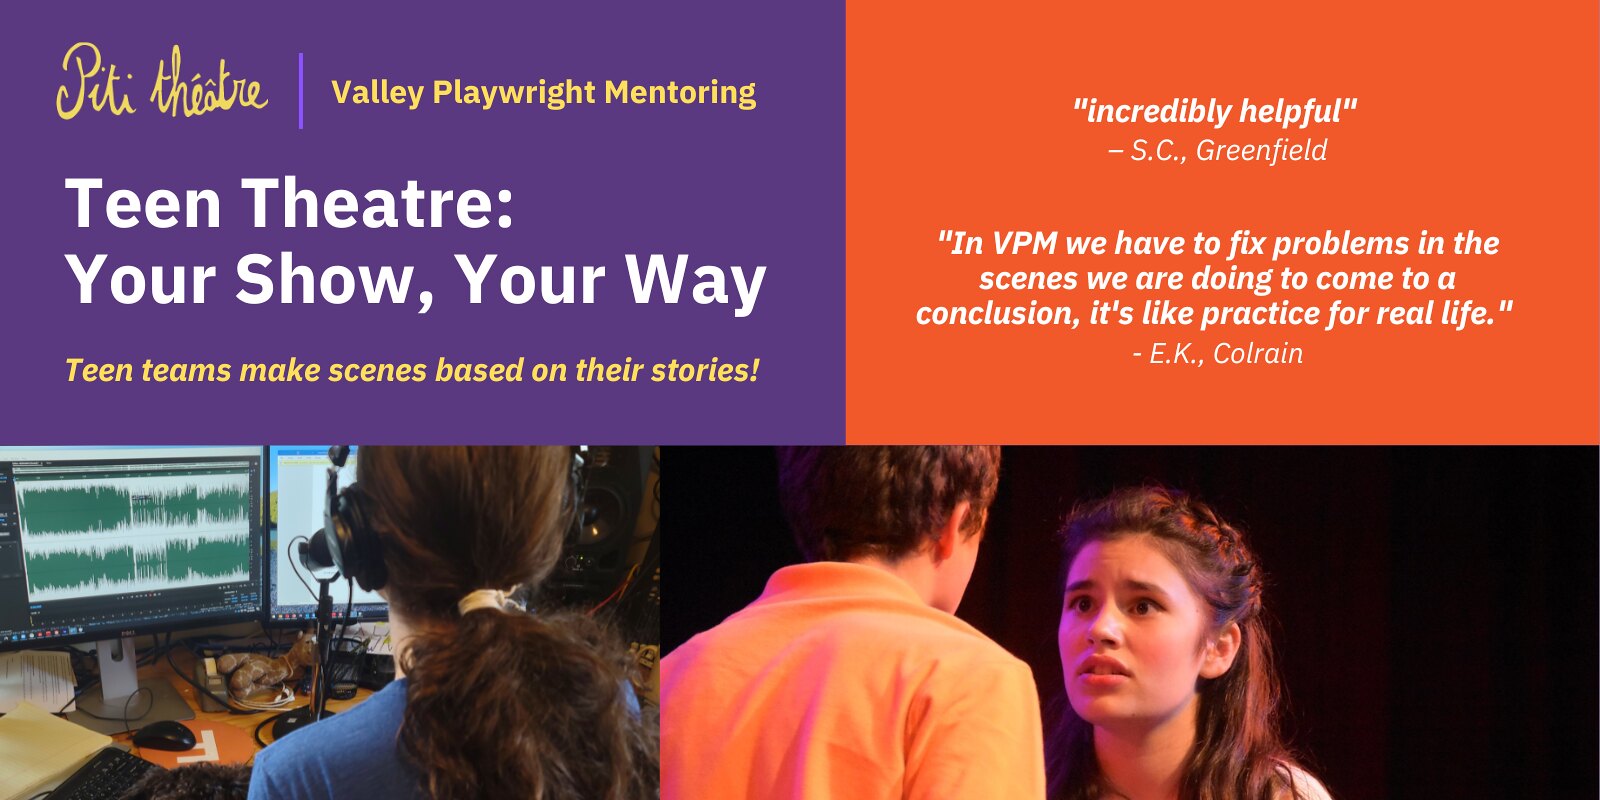 Valley Playwright Mentoring